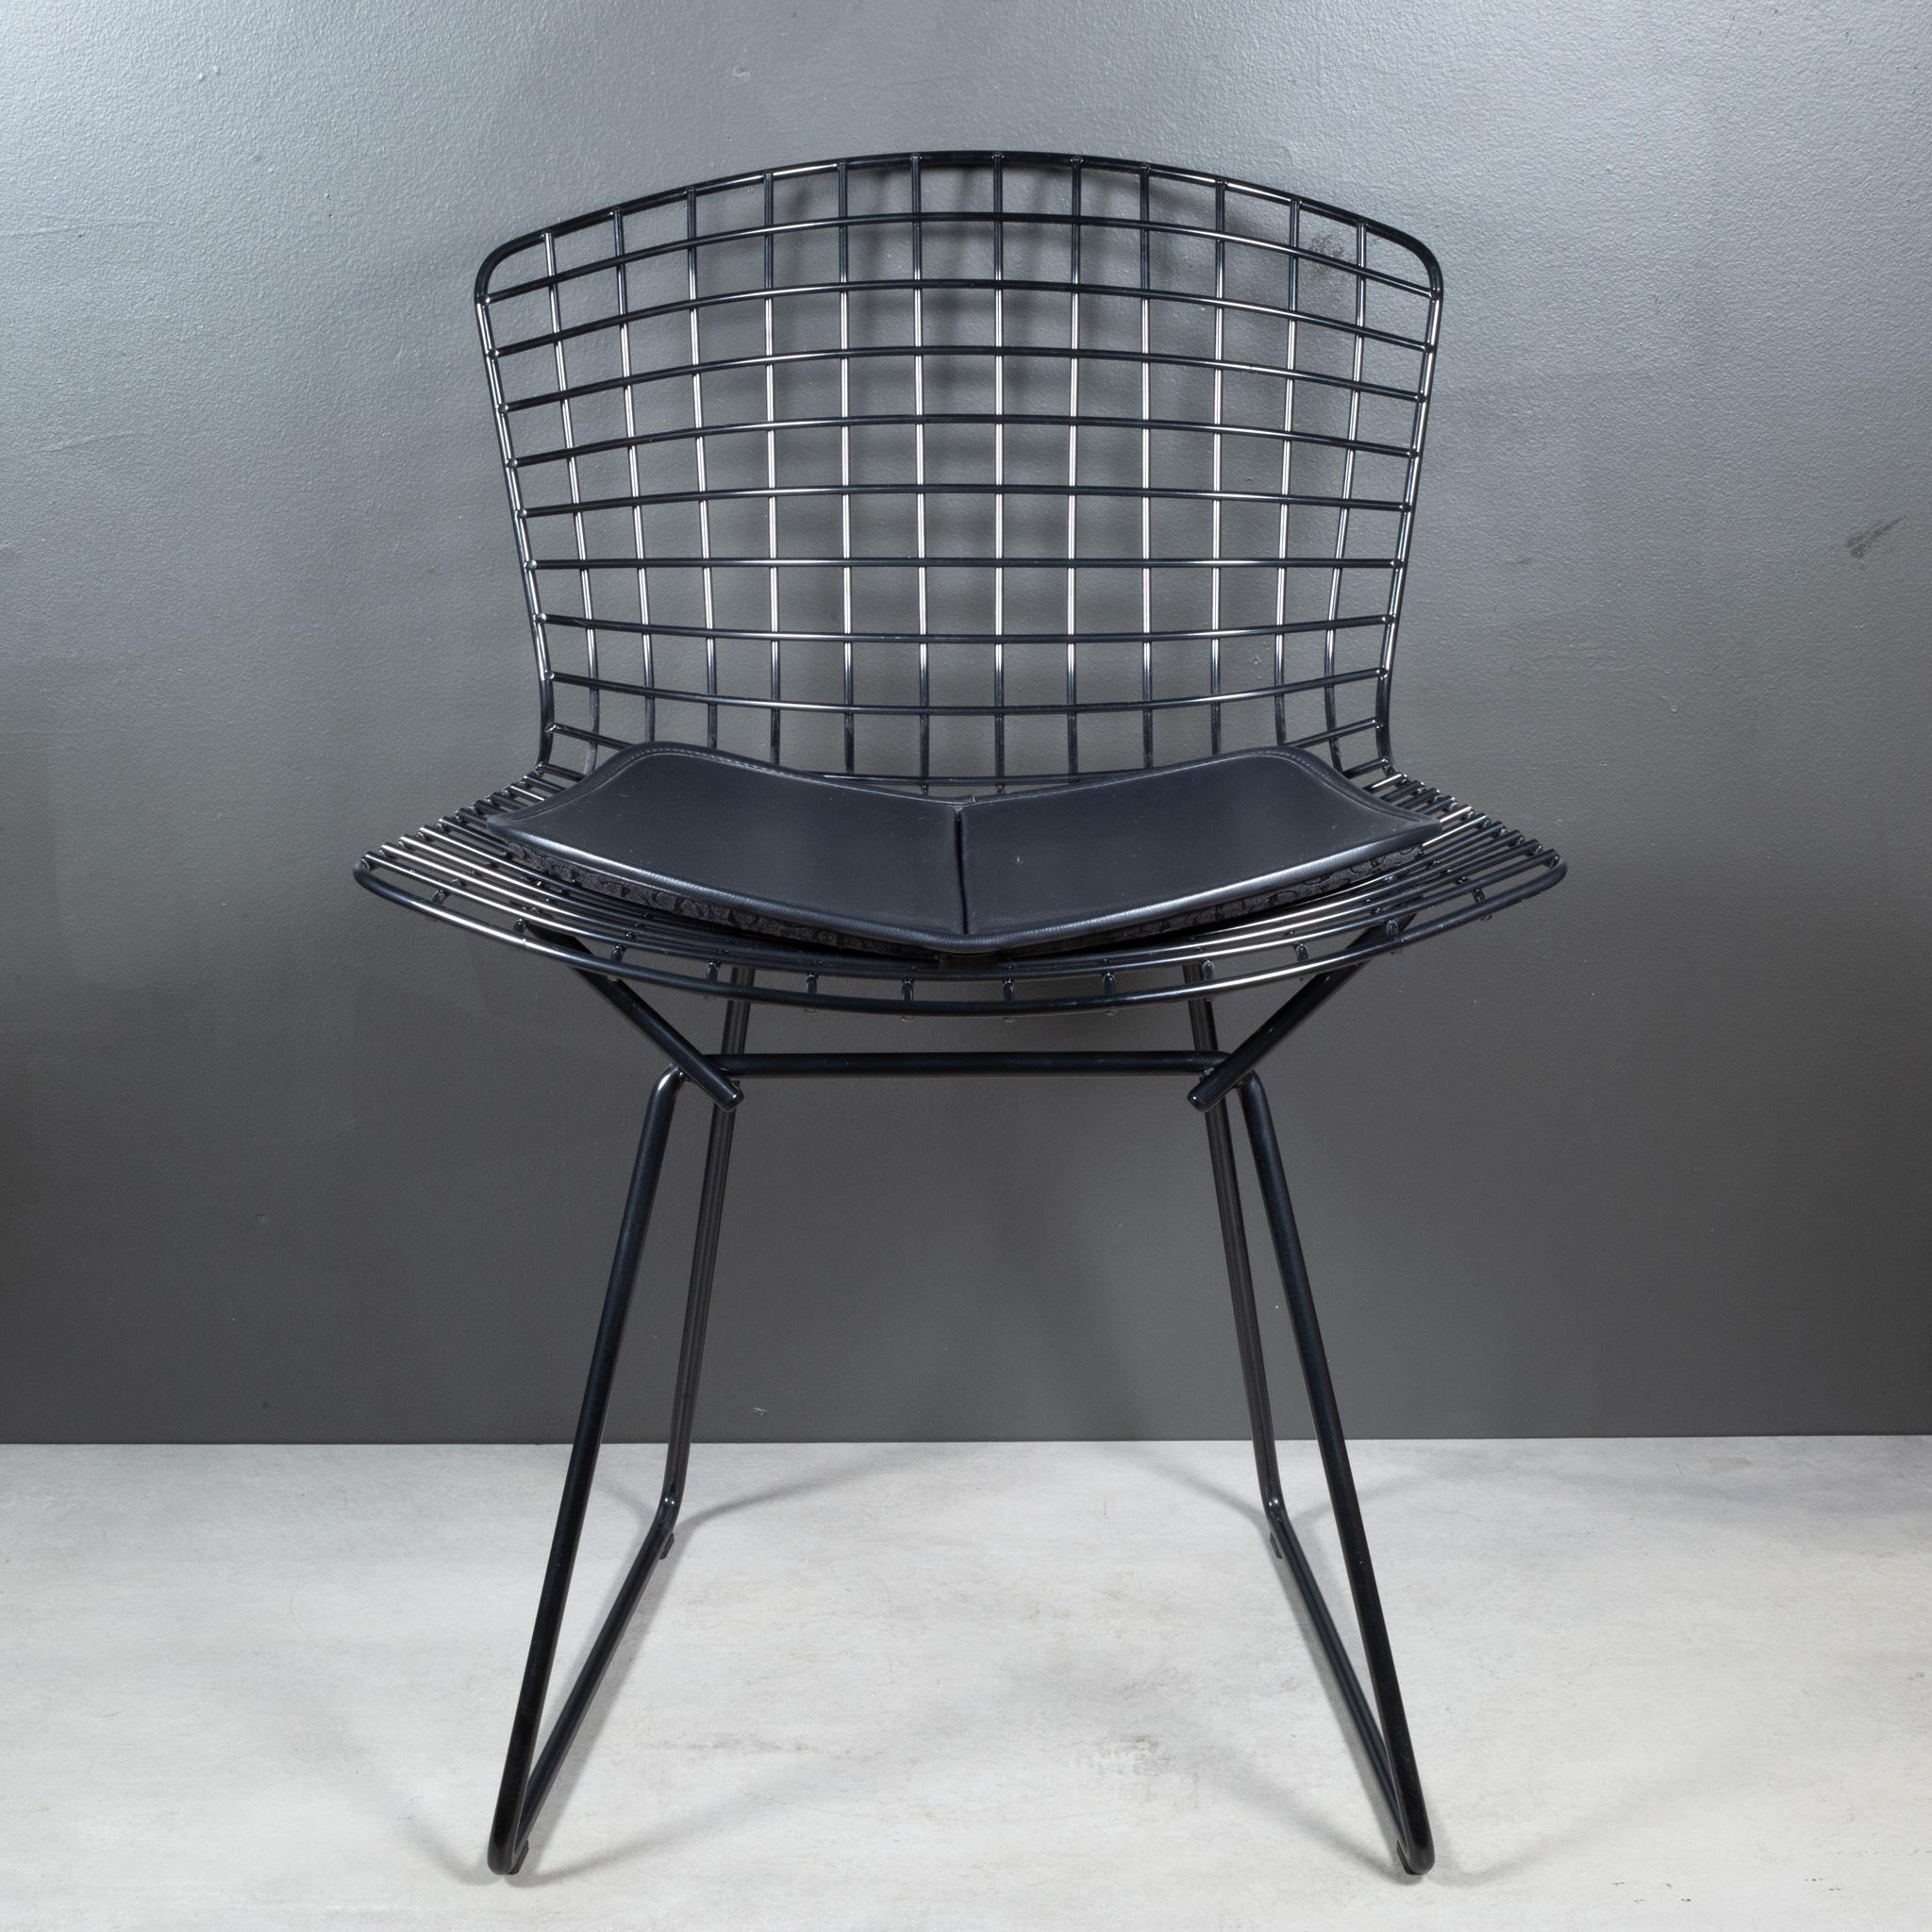 ABOUT

Sold as a set only. 

Contact us for more shipping options: S16 Home San Francisco. 

Featuring delicate filigreed construction that's supremely strong, the airy seats of the Bertoia Seating Collection (1952) are sculpted out of steel rods